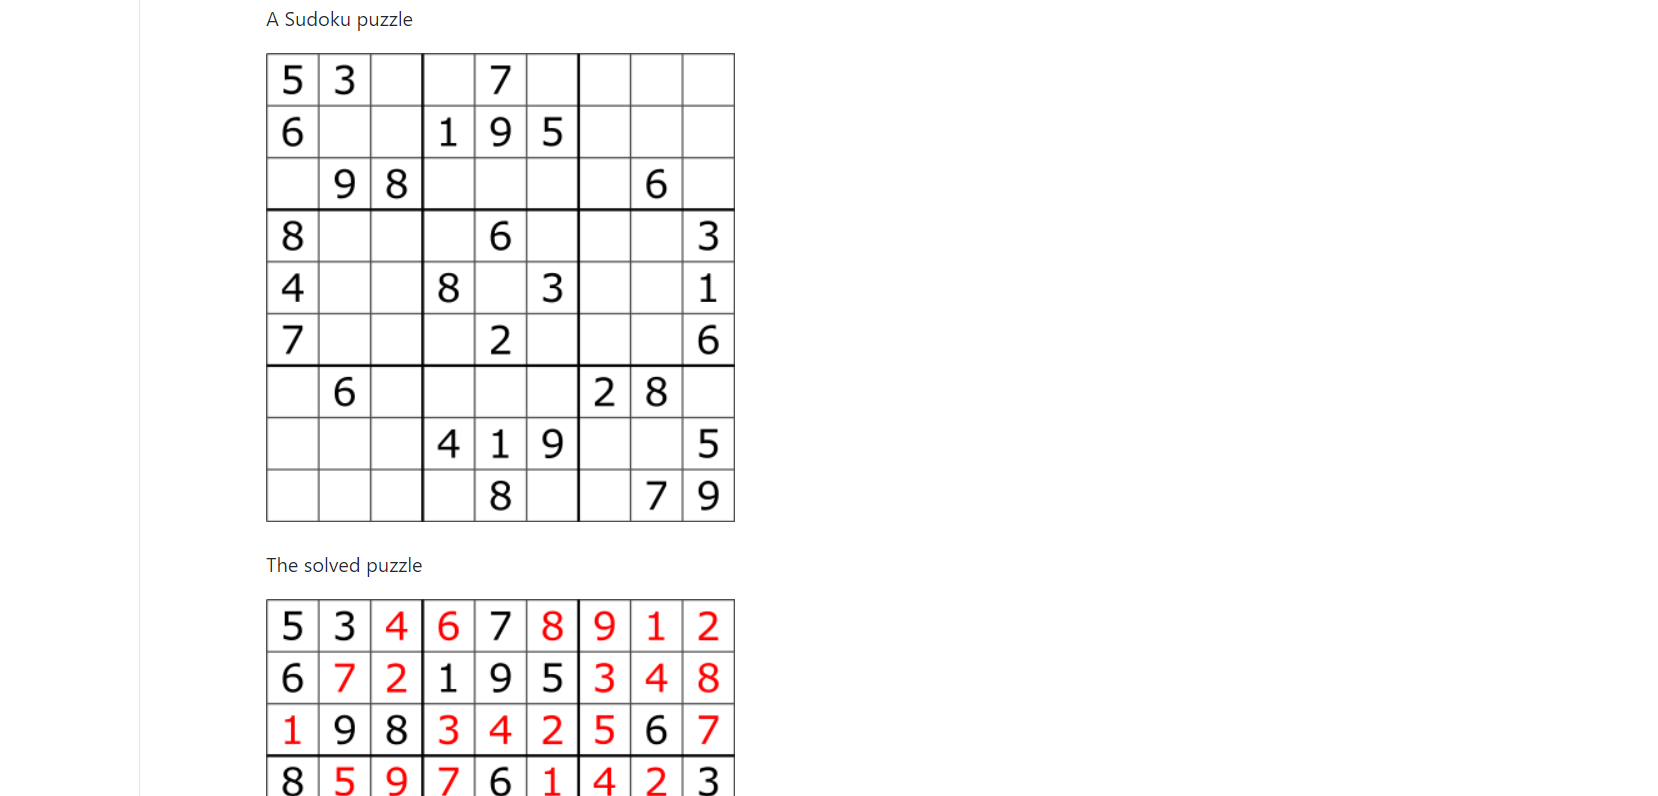 What is Sudoku?